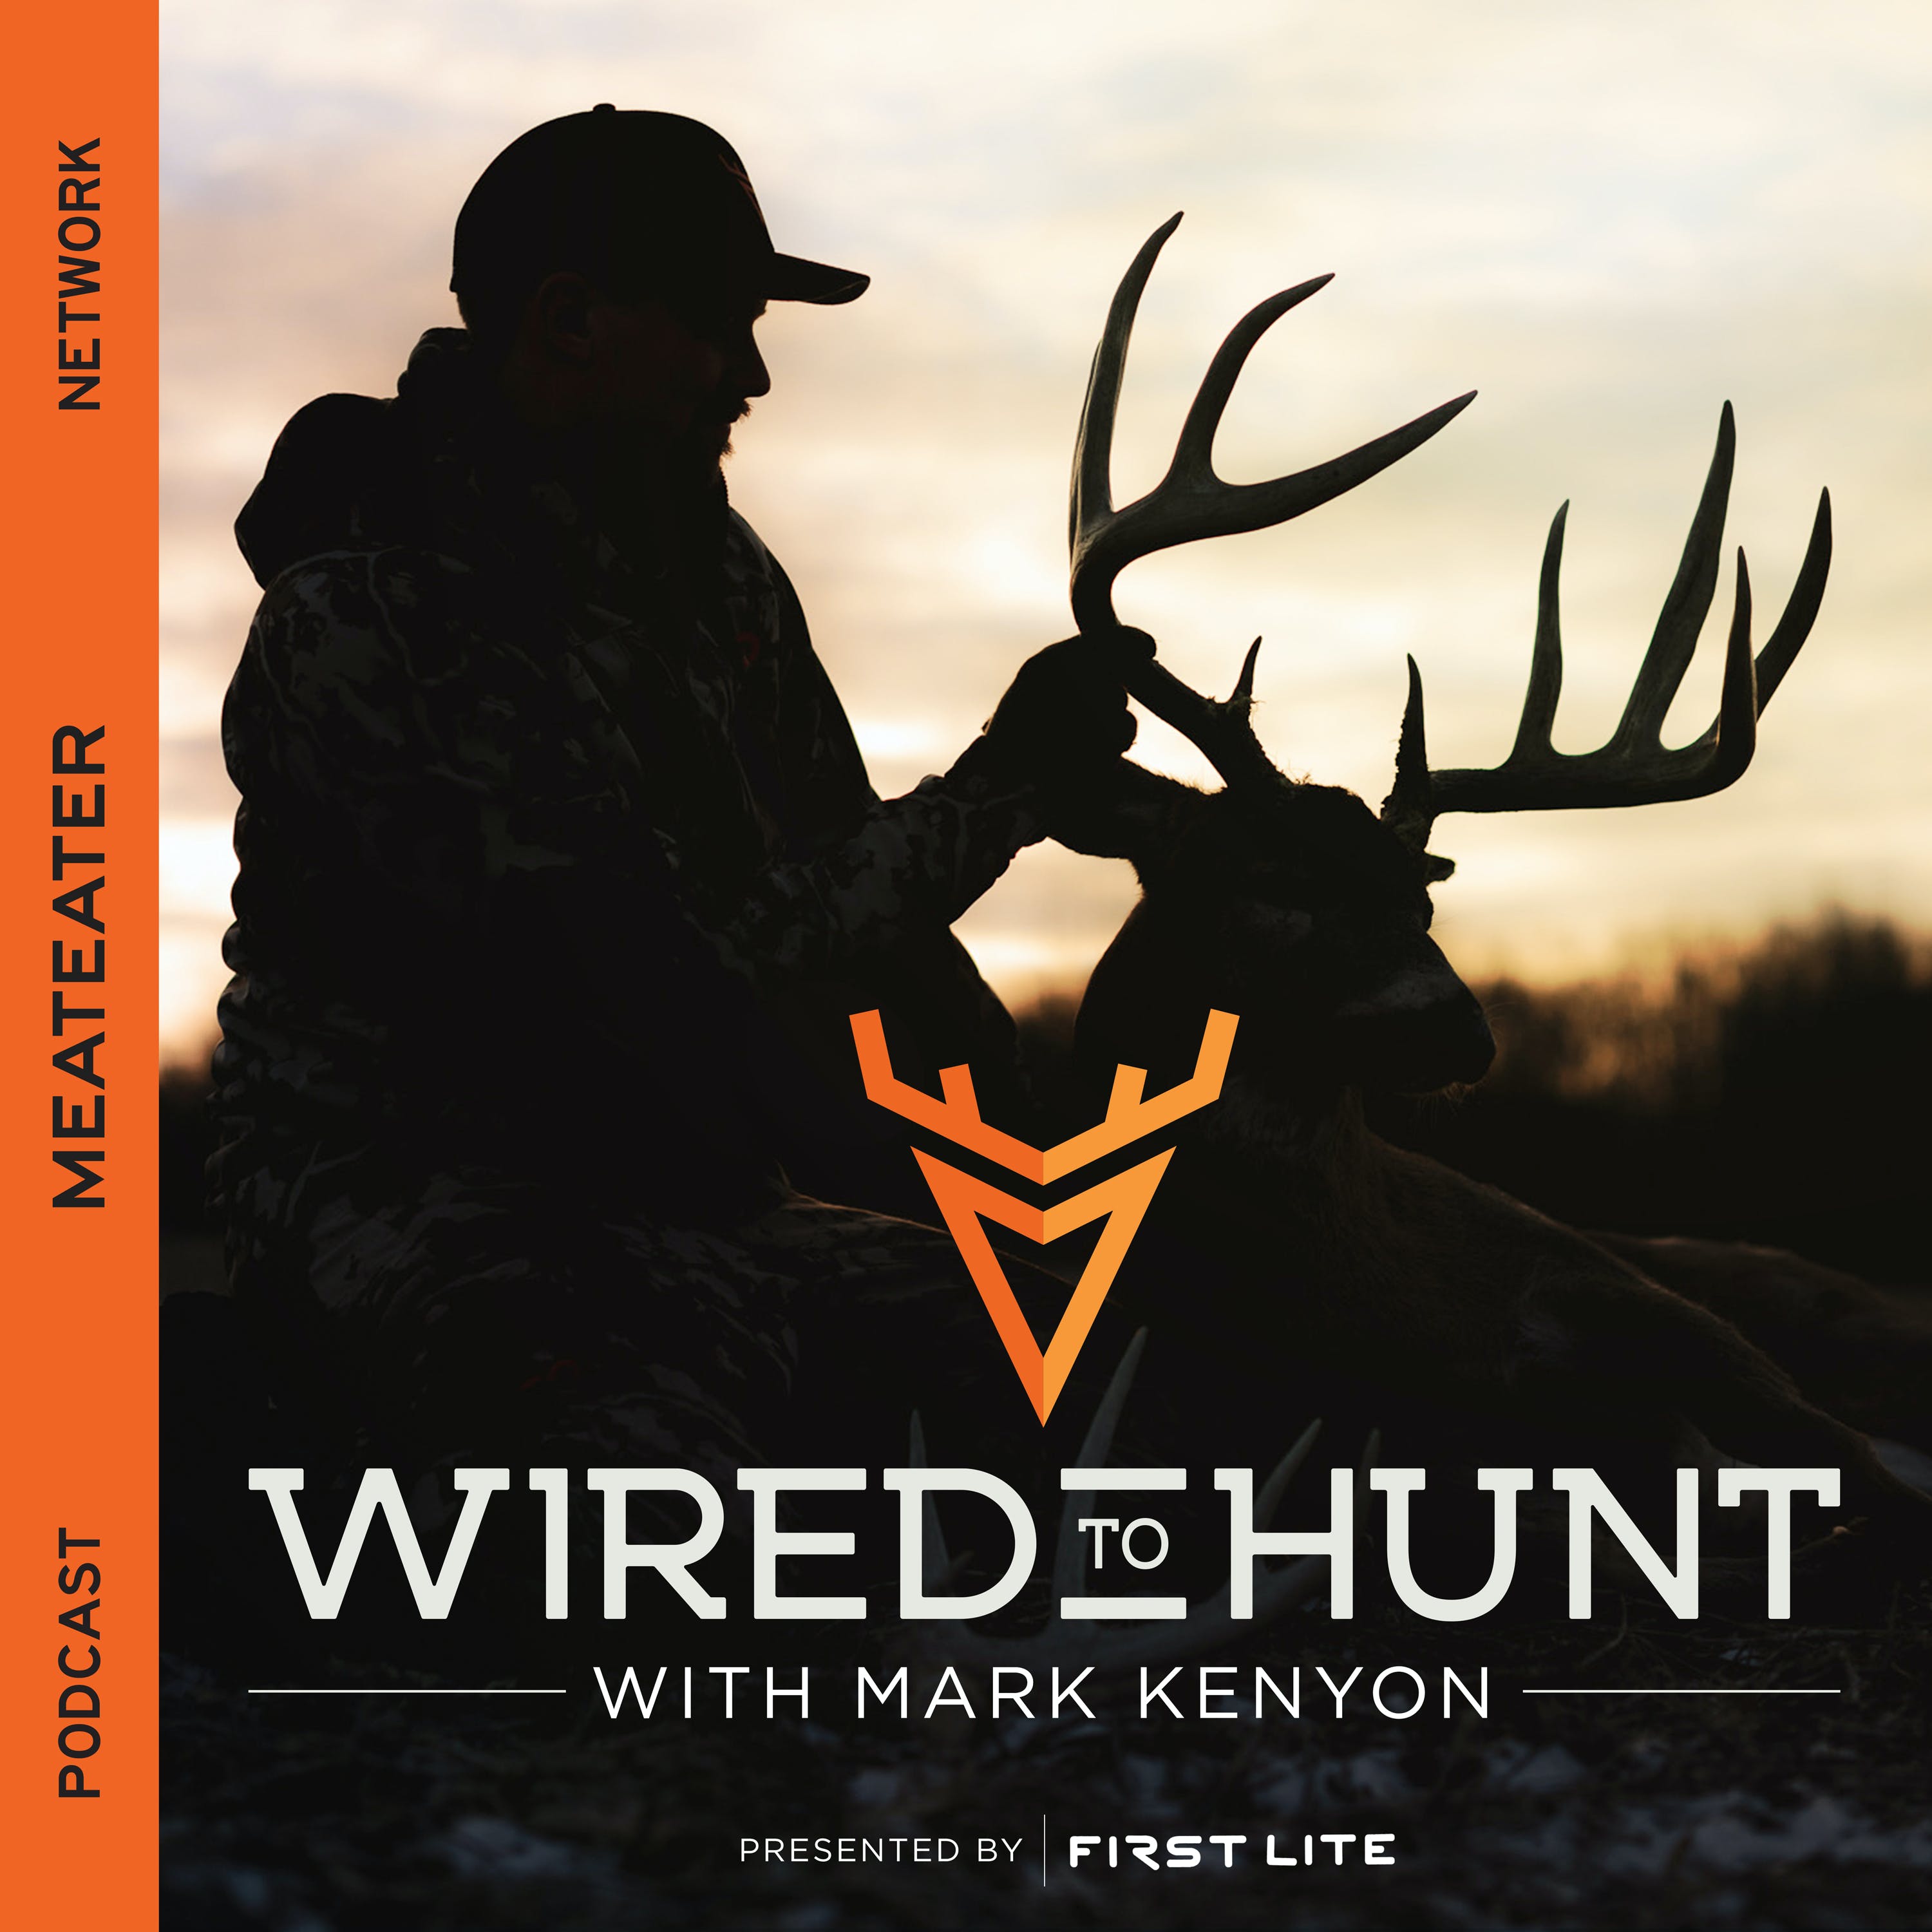 Ep. 423: Foundations - Why You Should Develop a True Love of Deer Scouting